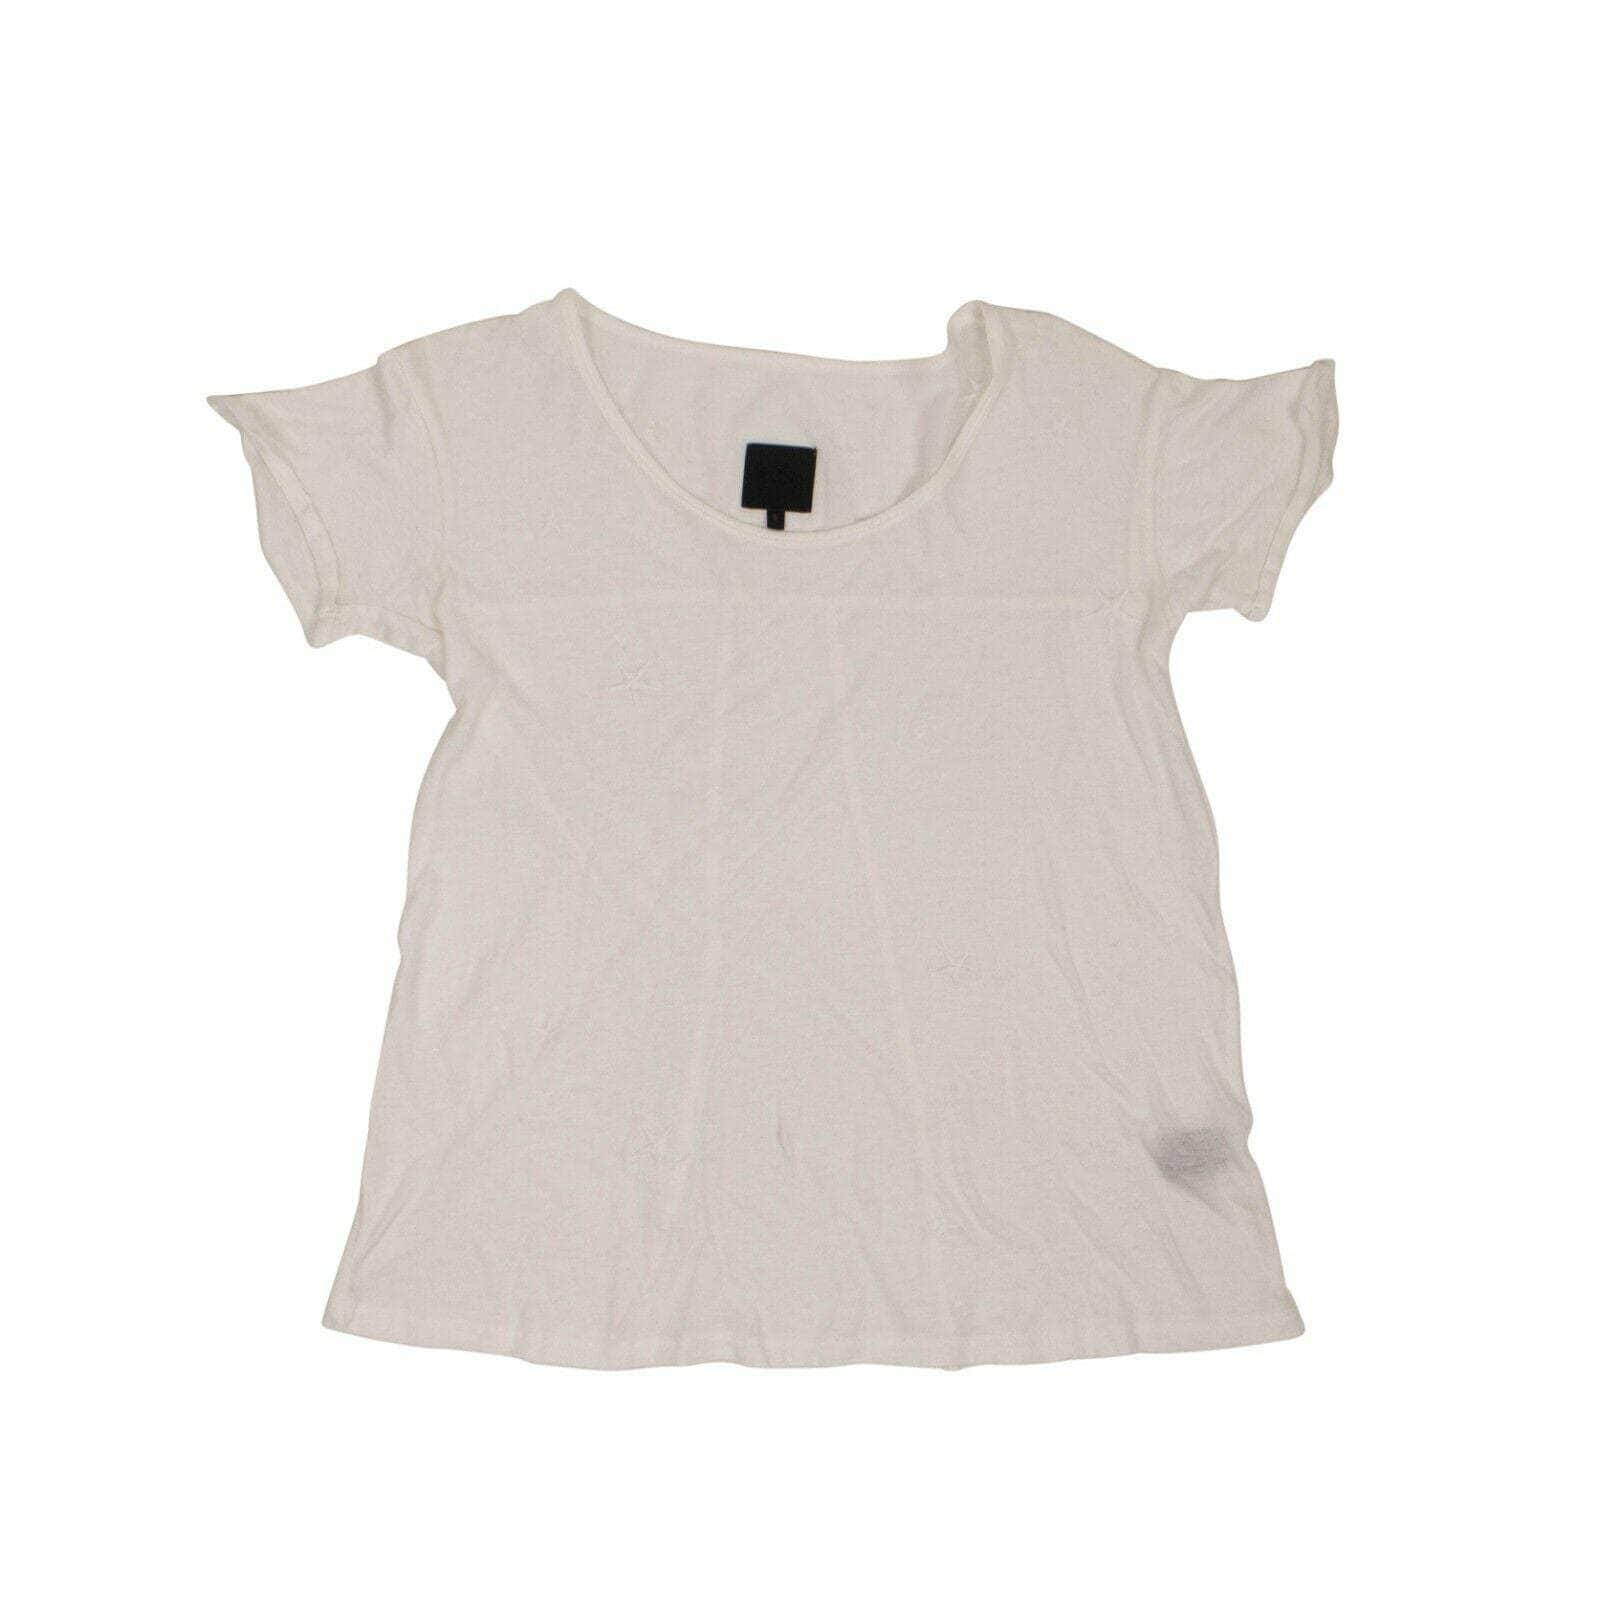 RtA chicmi, couponcollection, gender-womens, main-clothing, MixedApparel, rta, size-m, size-s, size-xs, t-shirt, under-250 Cotton 'Jewel' Short Sleeves T-Shirt - White